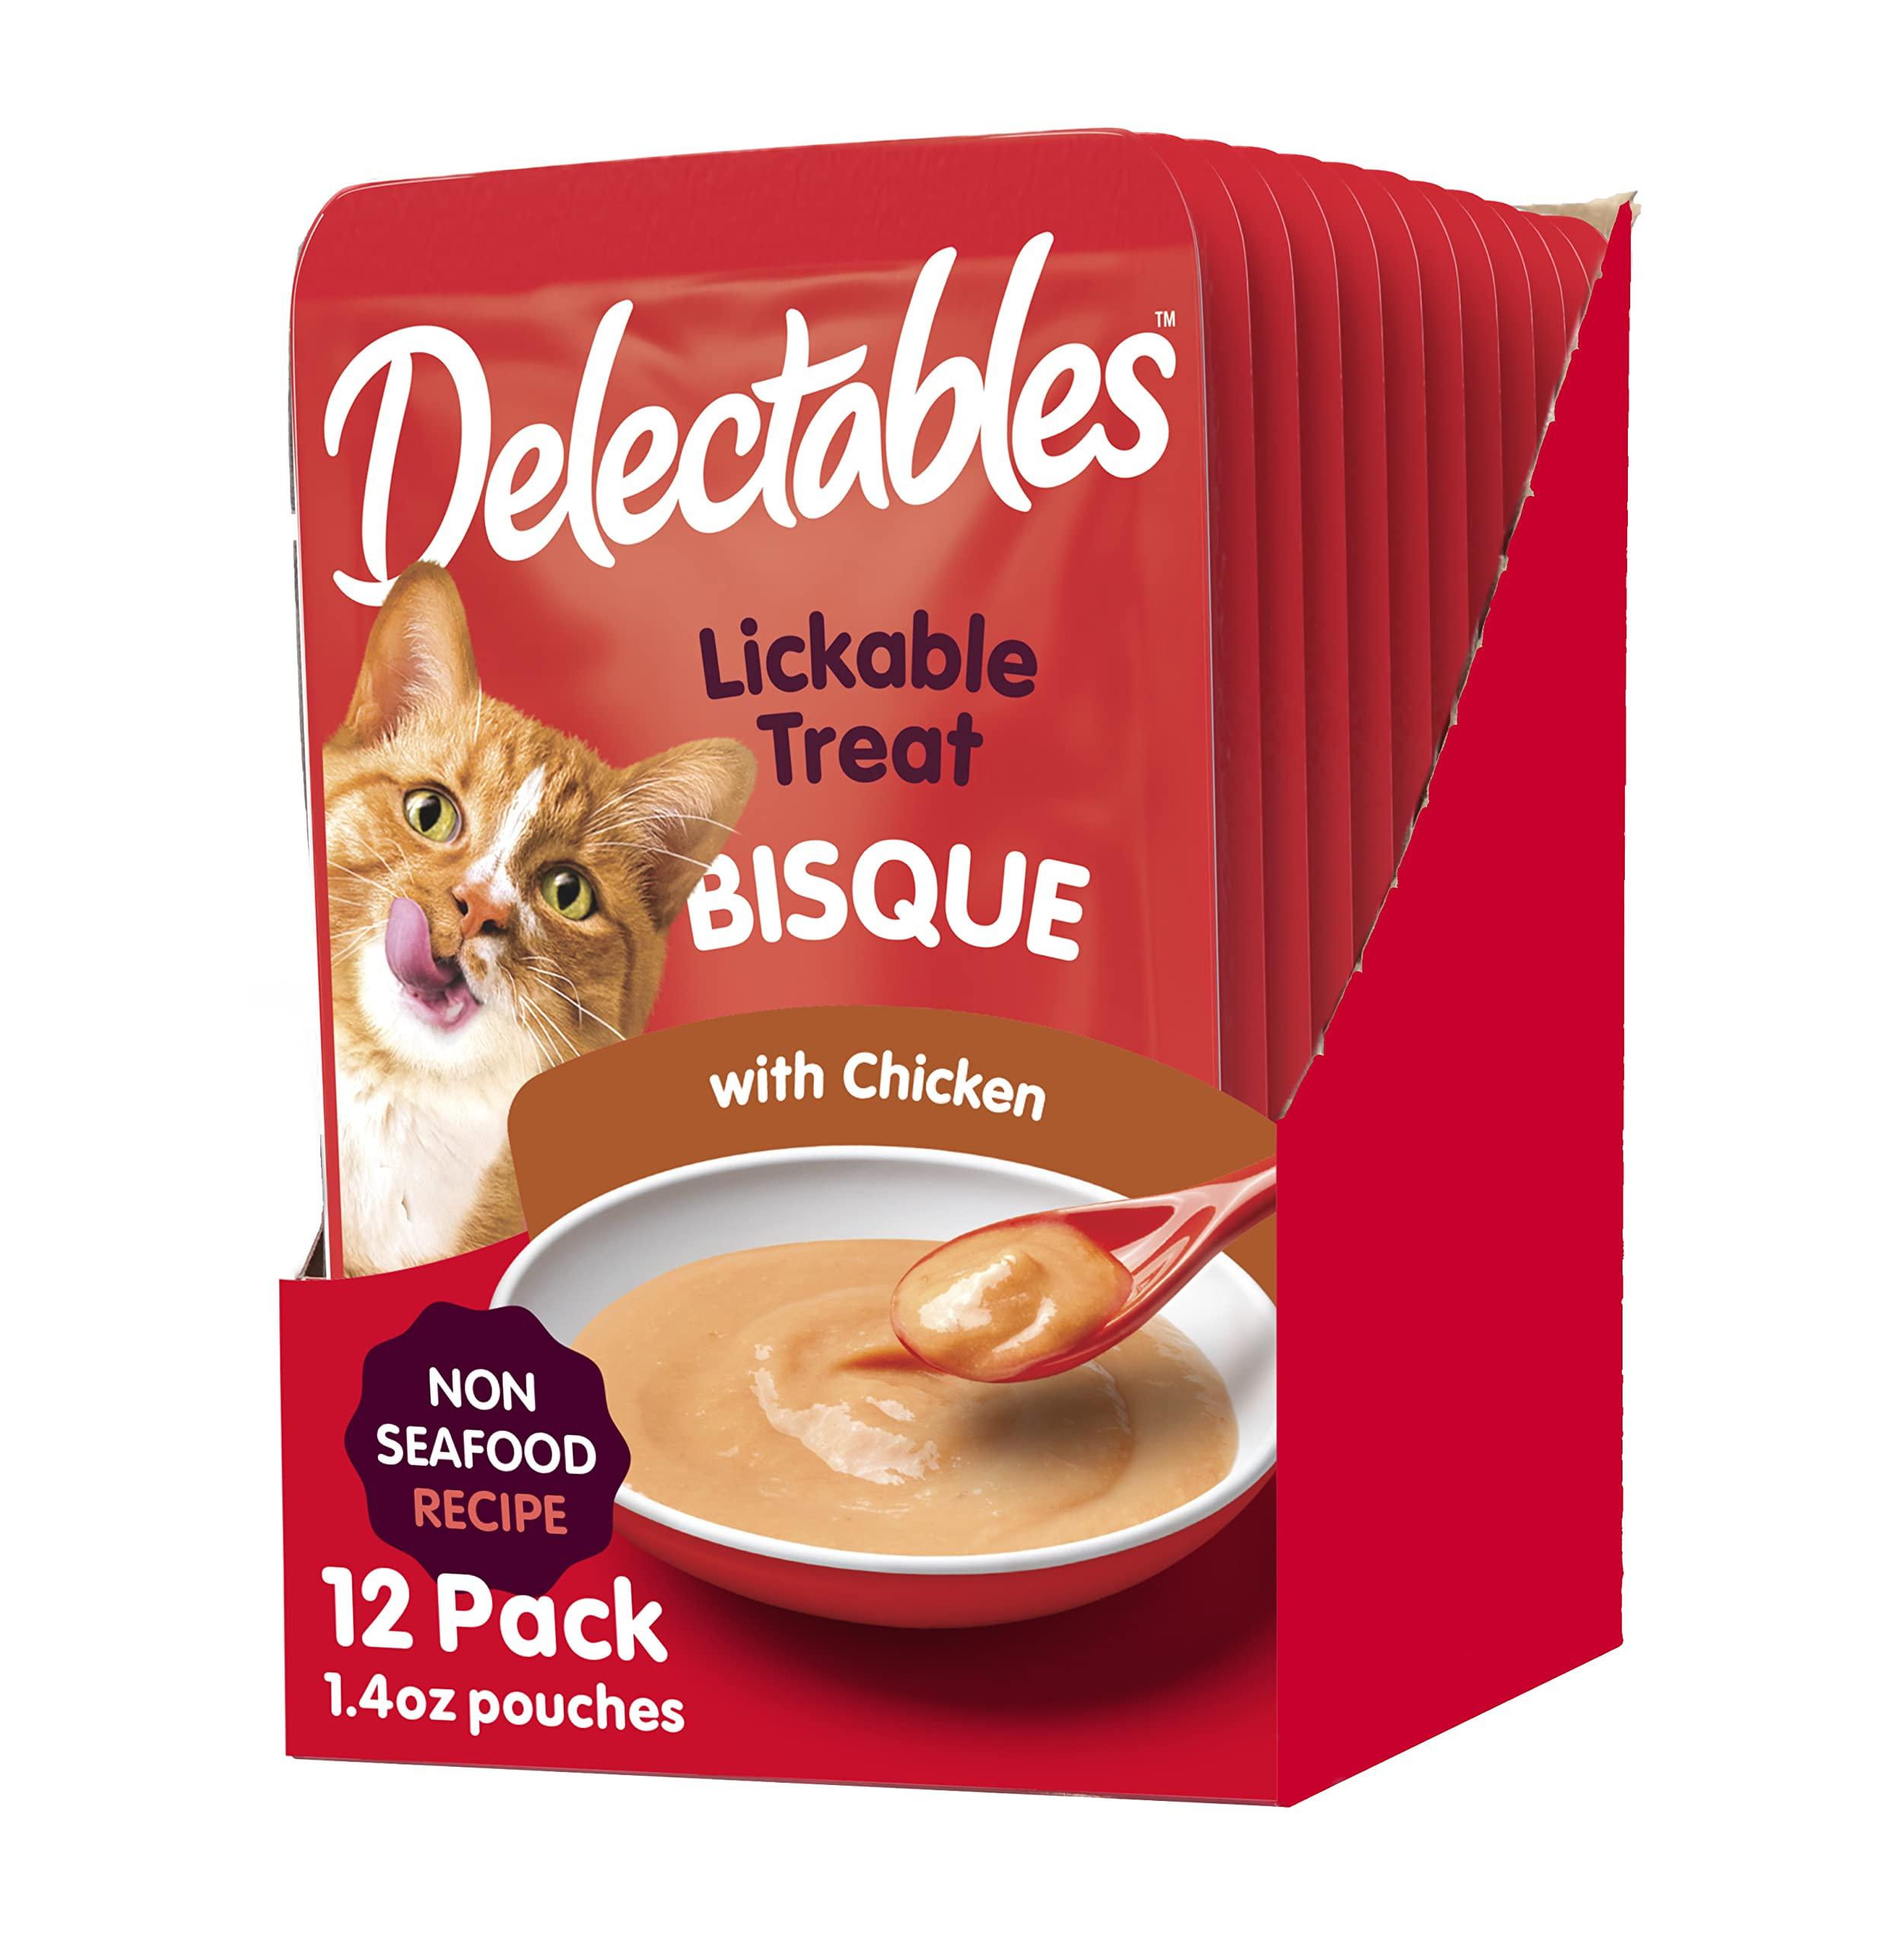 Hartz Delectables Non-Seafood Bisque Lickable We Cat Treats for Adults & Senior Cats, Chicken (Pack of 12)